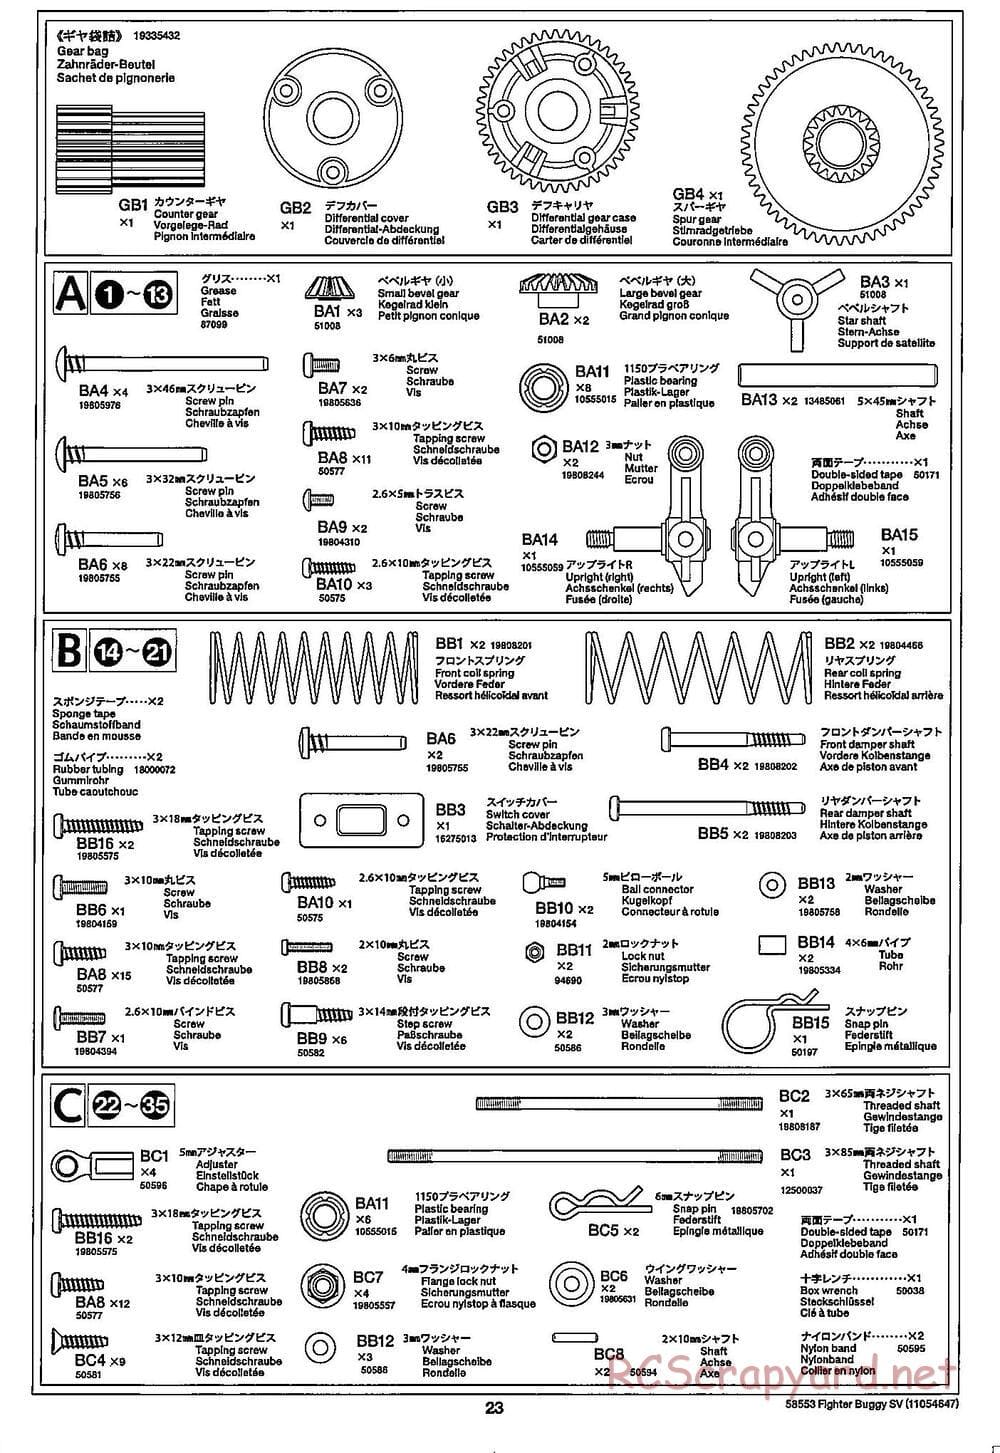 Tamiya - Fighter Buggy SV Chassis - Manual - Page 23